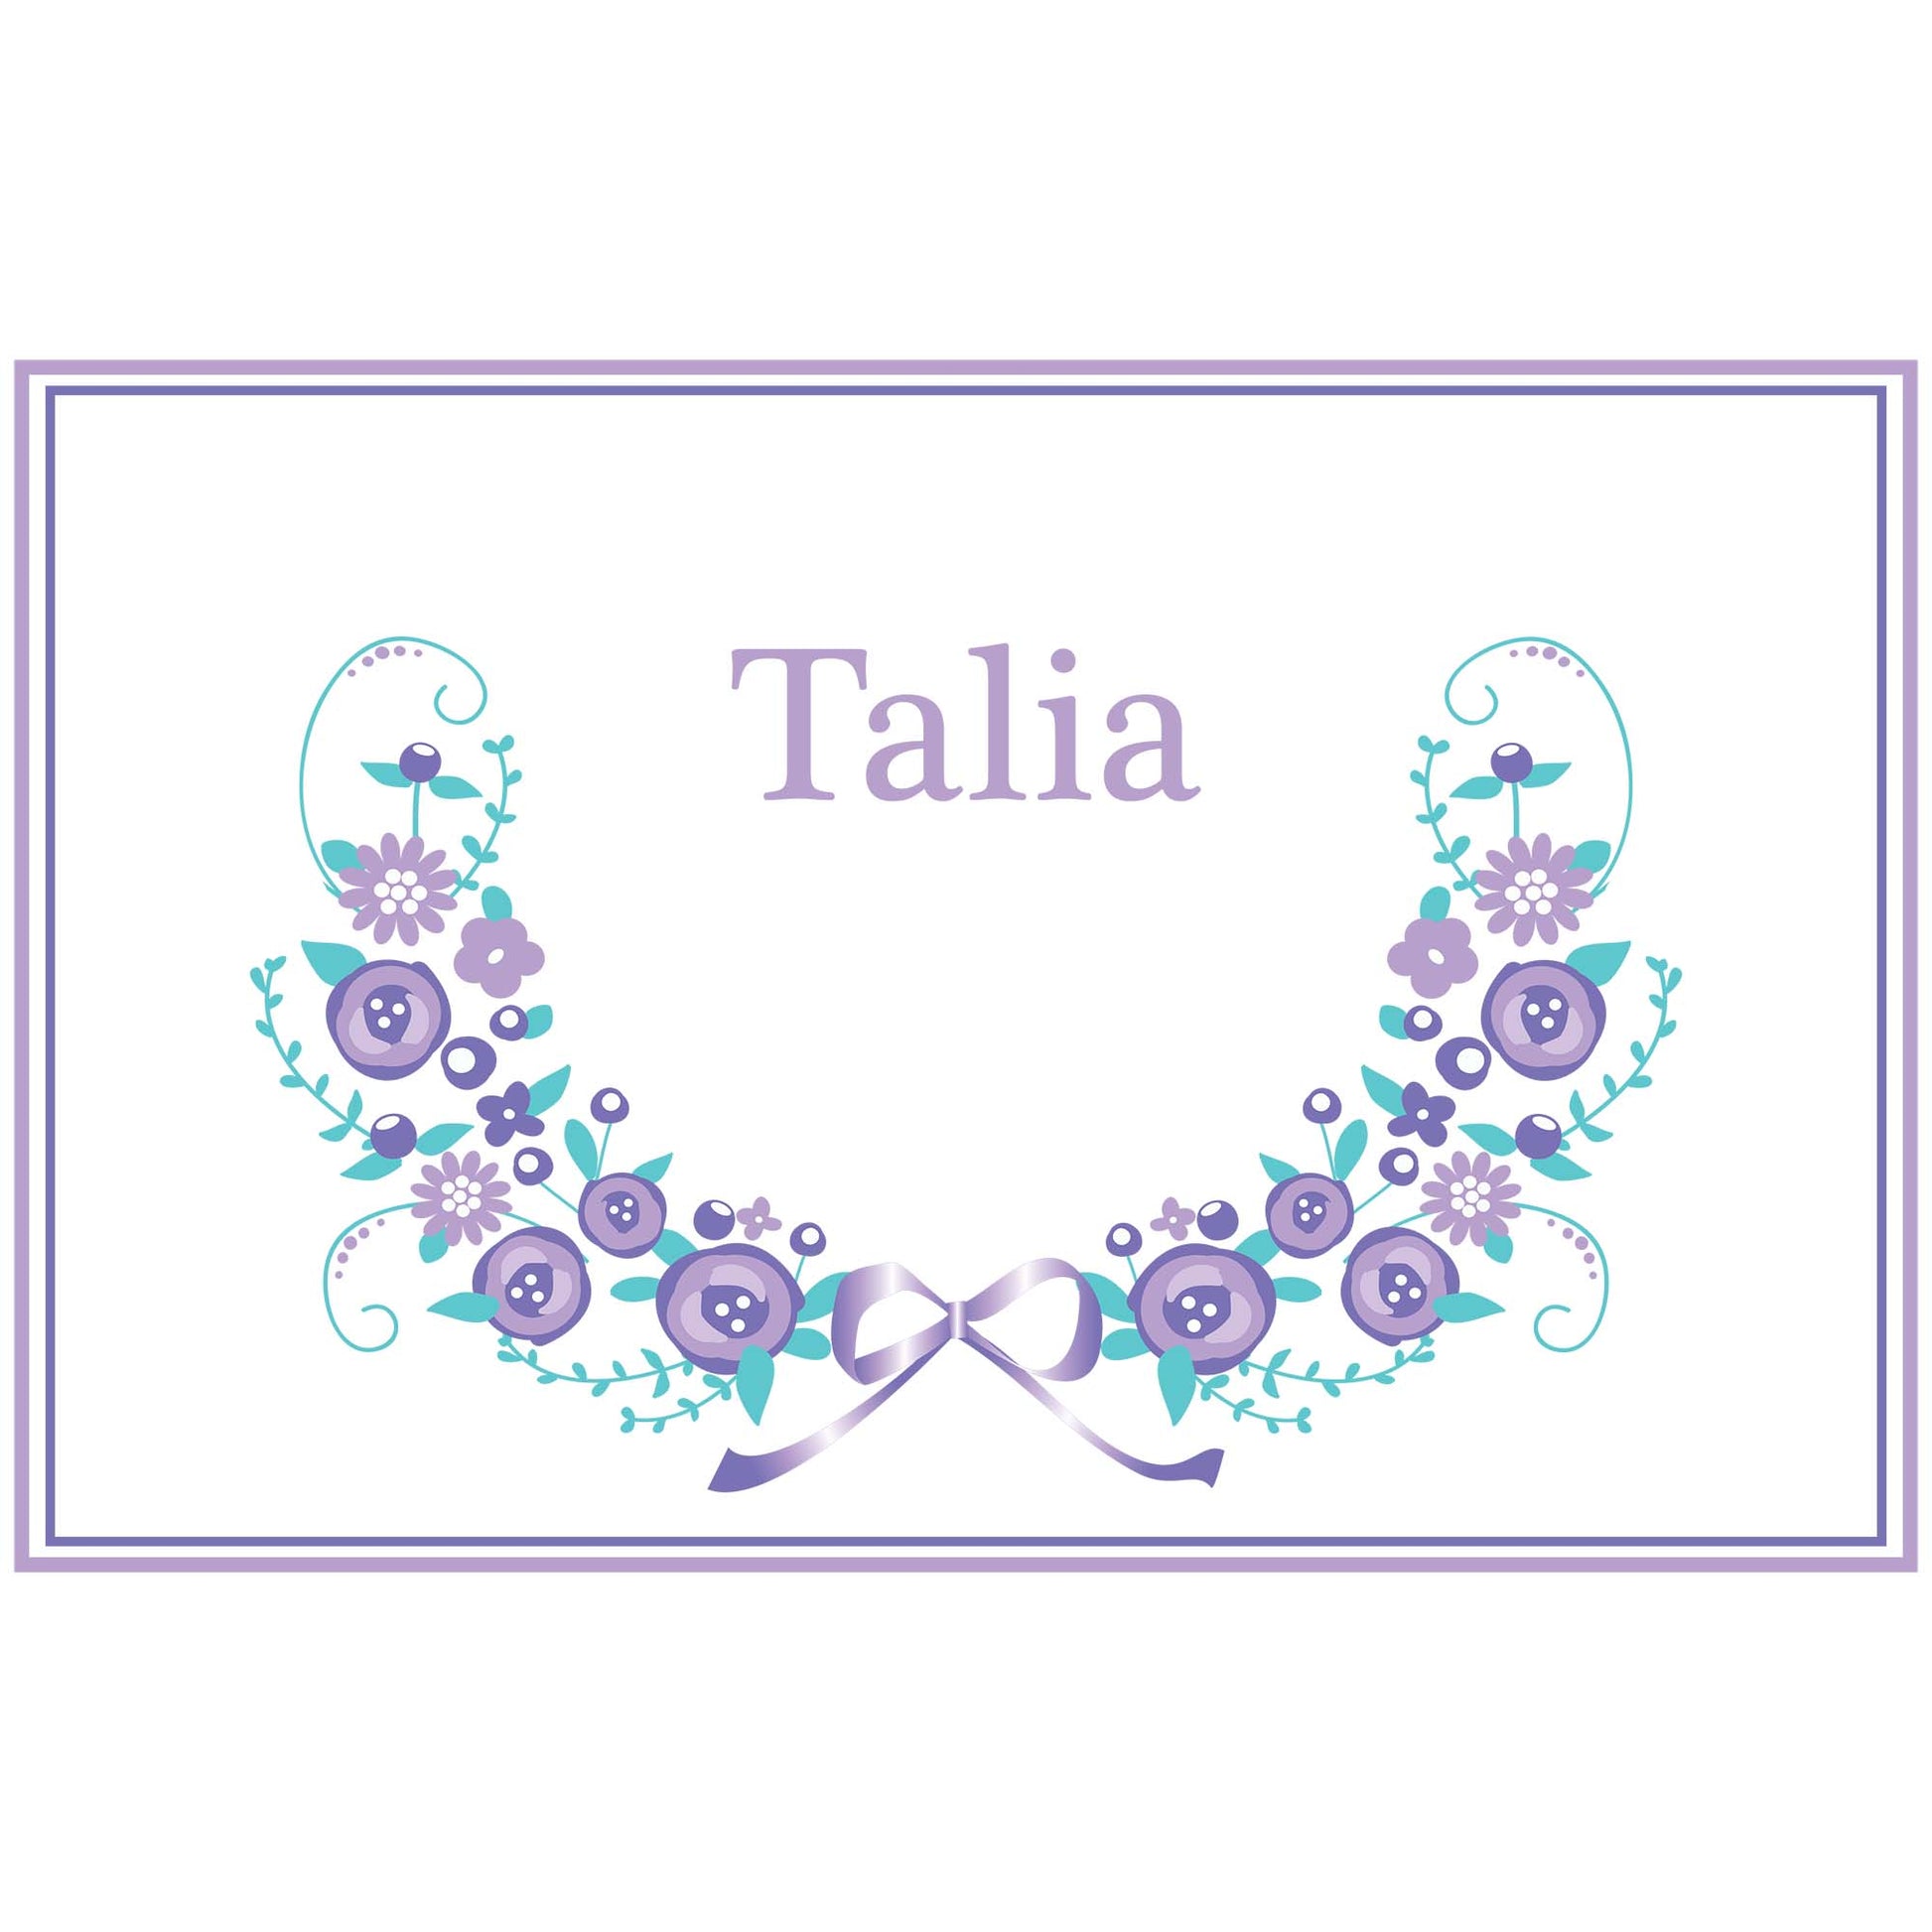 Personalized Placemat with Lavender Floral Garland design